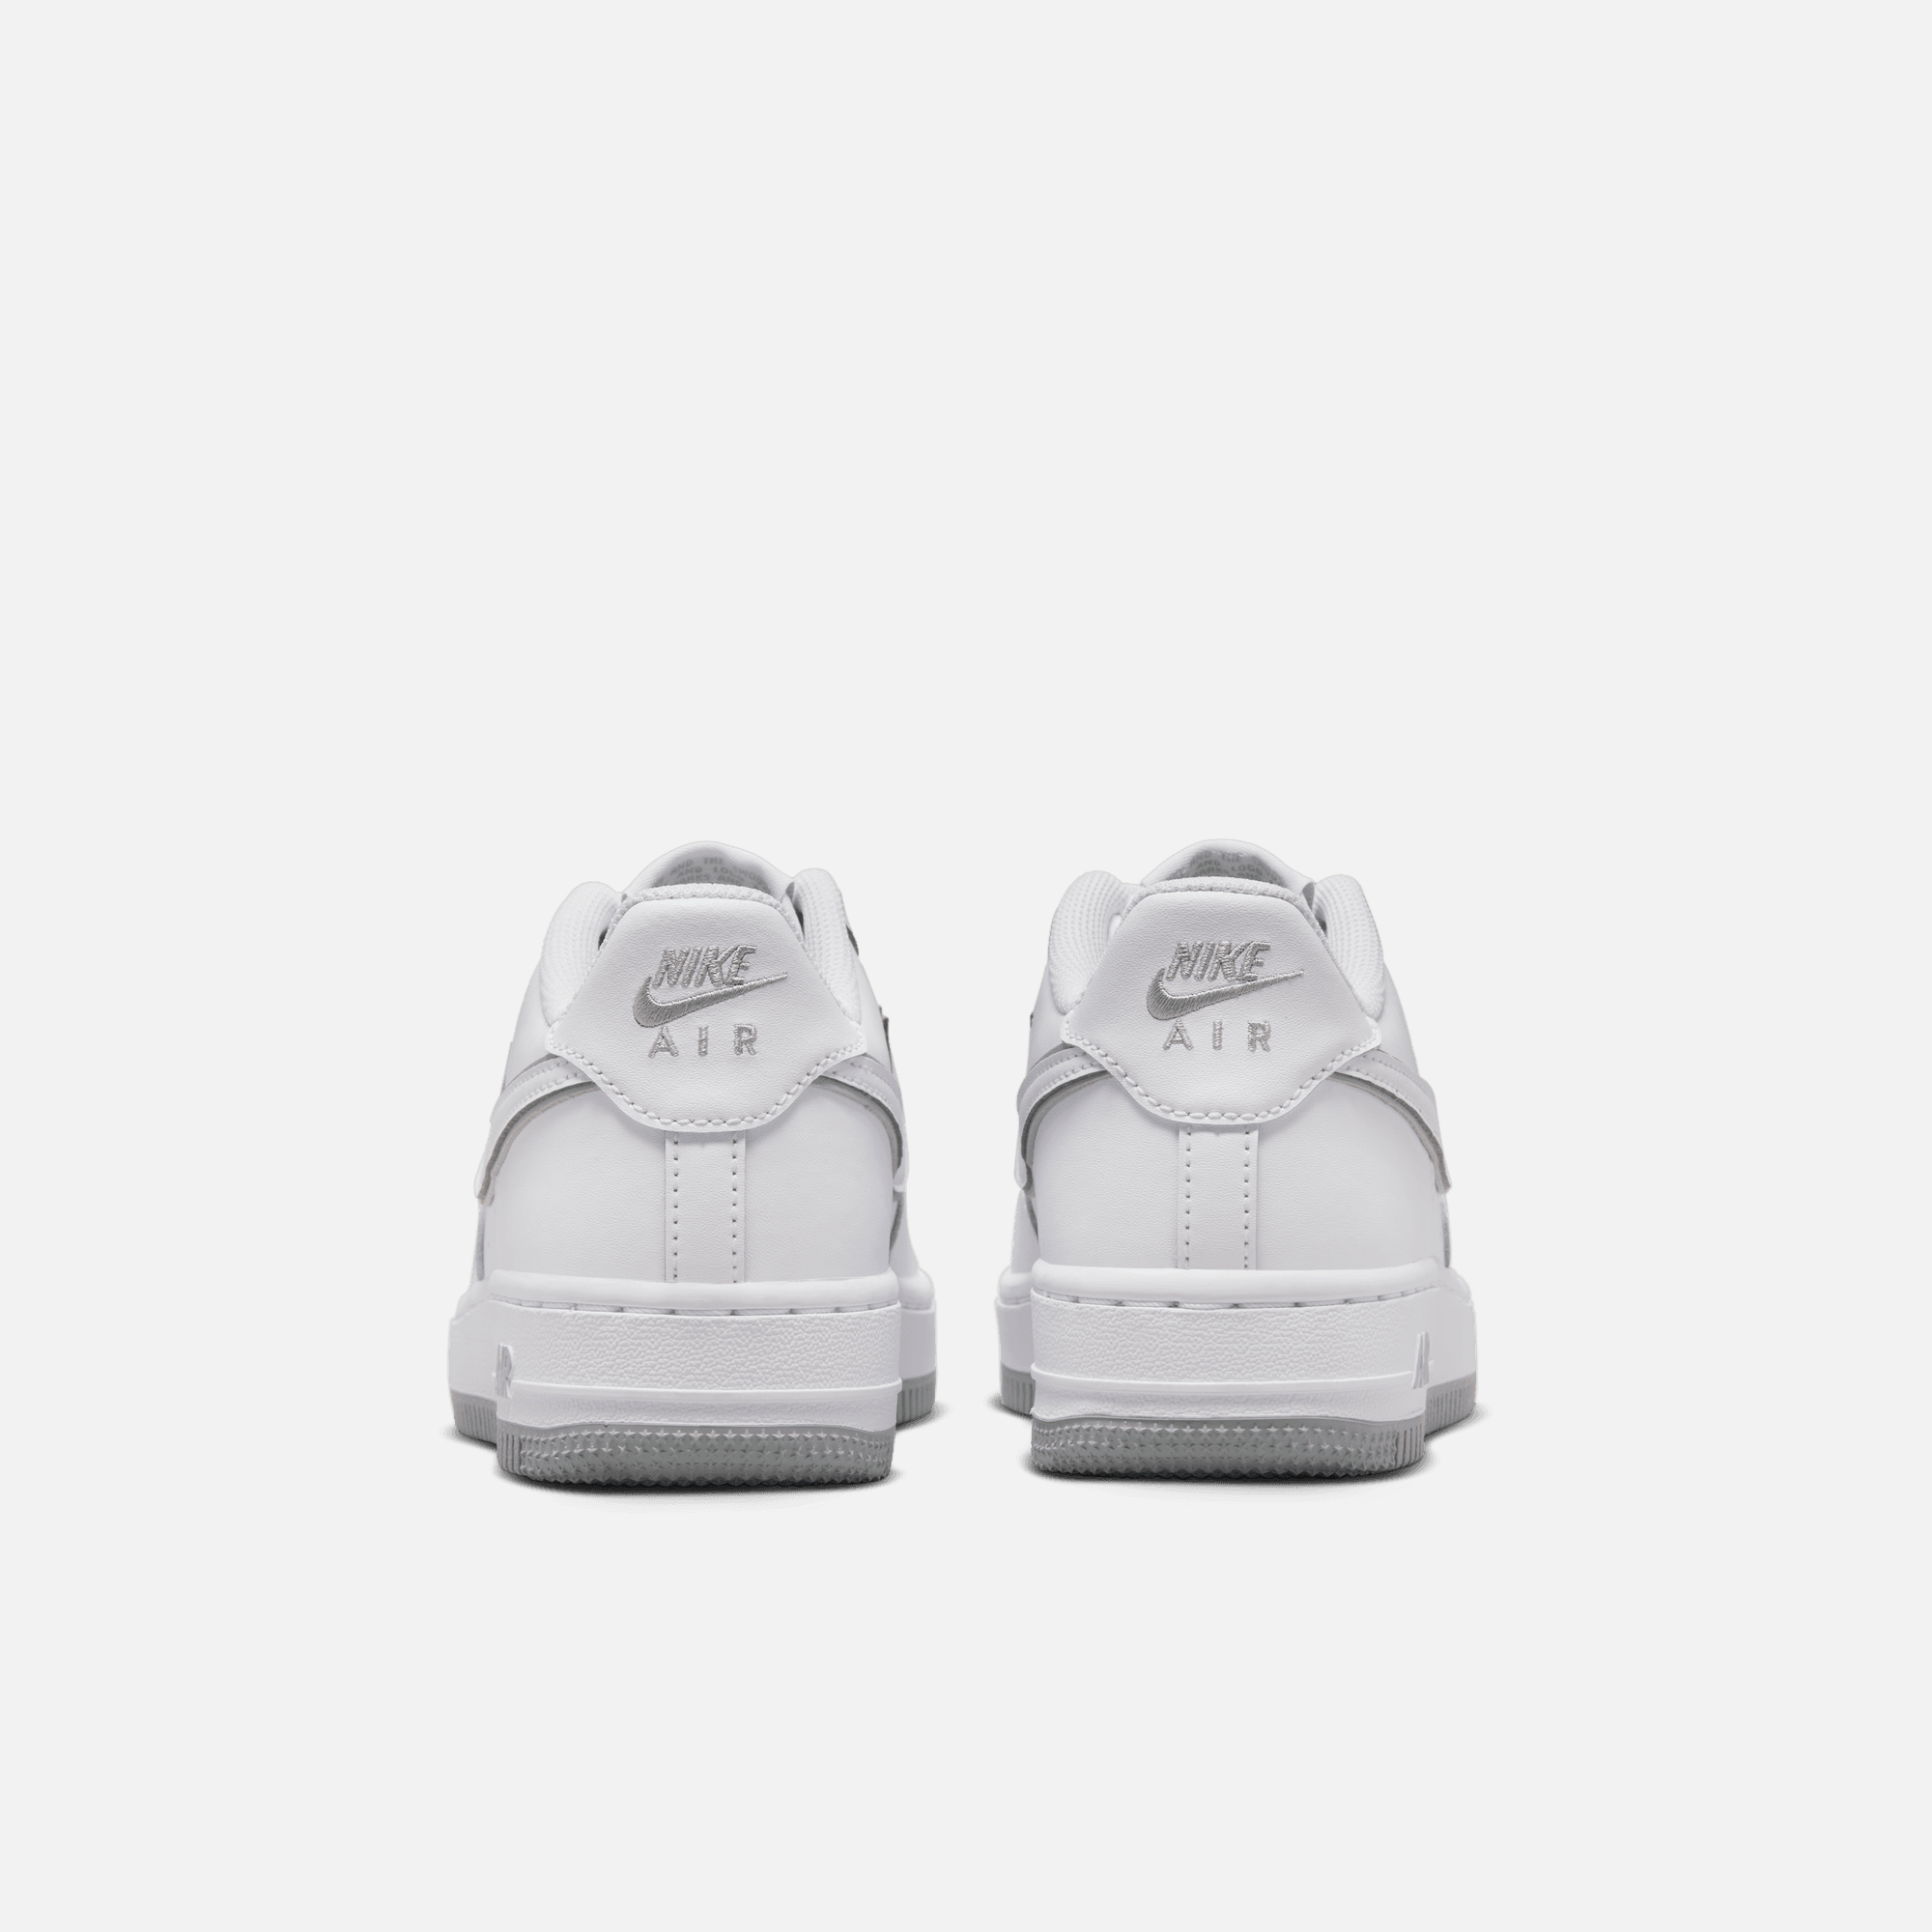 Nike Air Force 1 LV8 3 Wolf Grey (GS) for Women